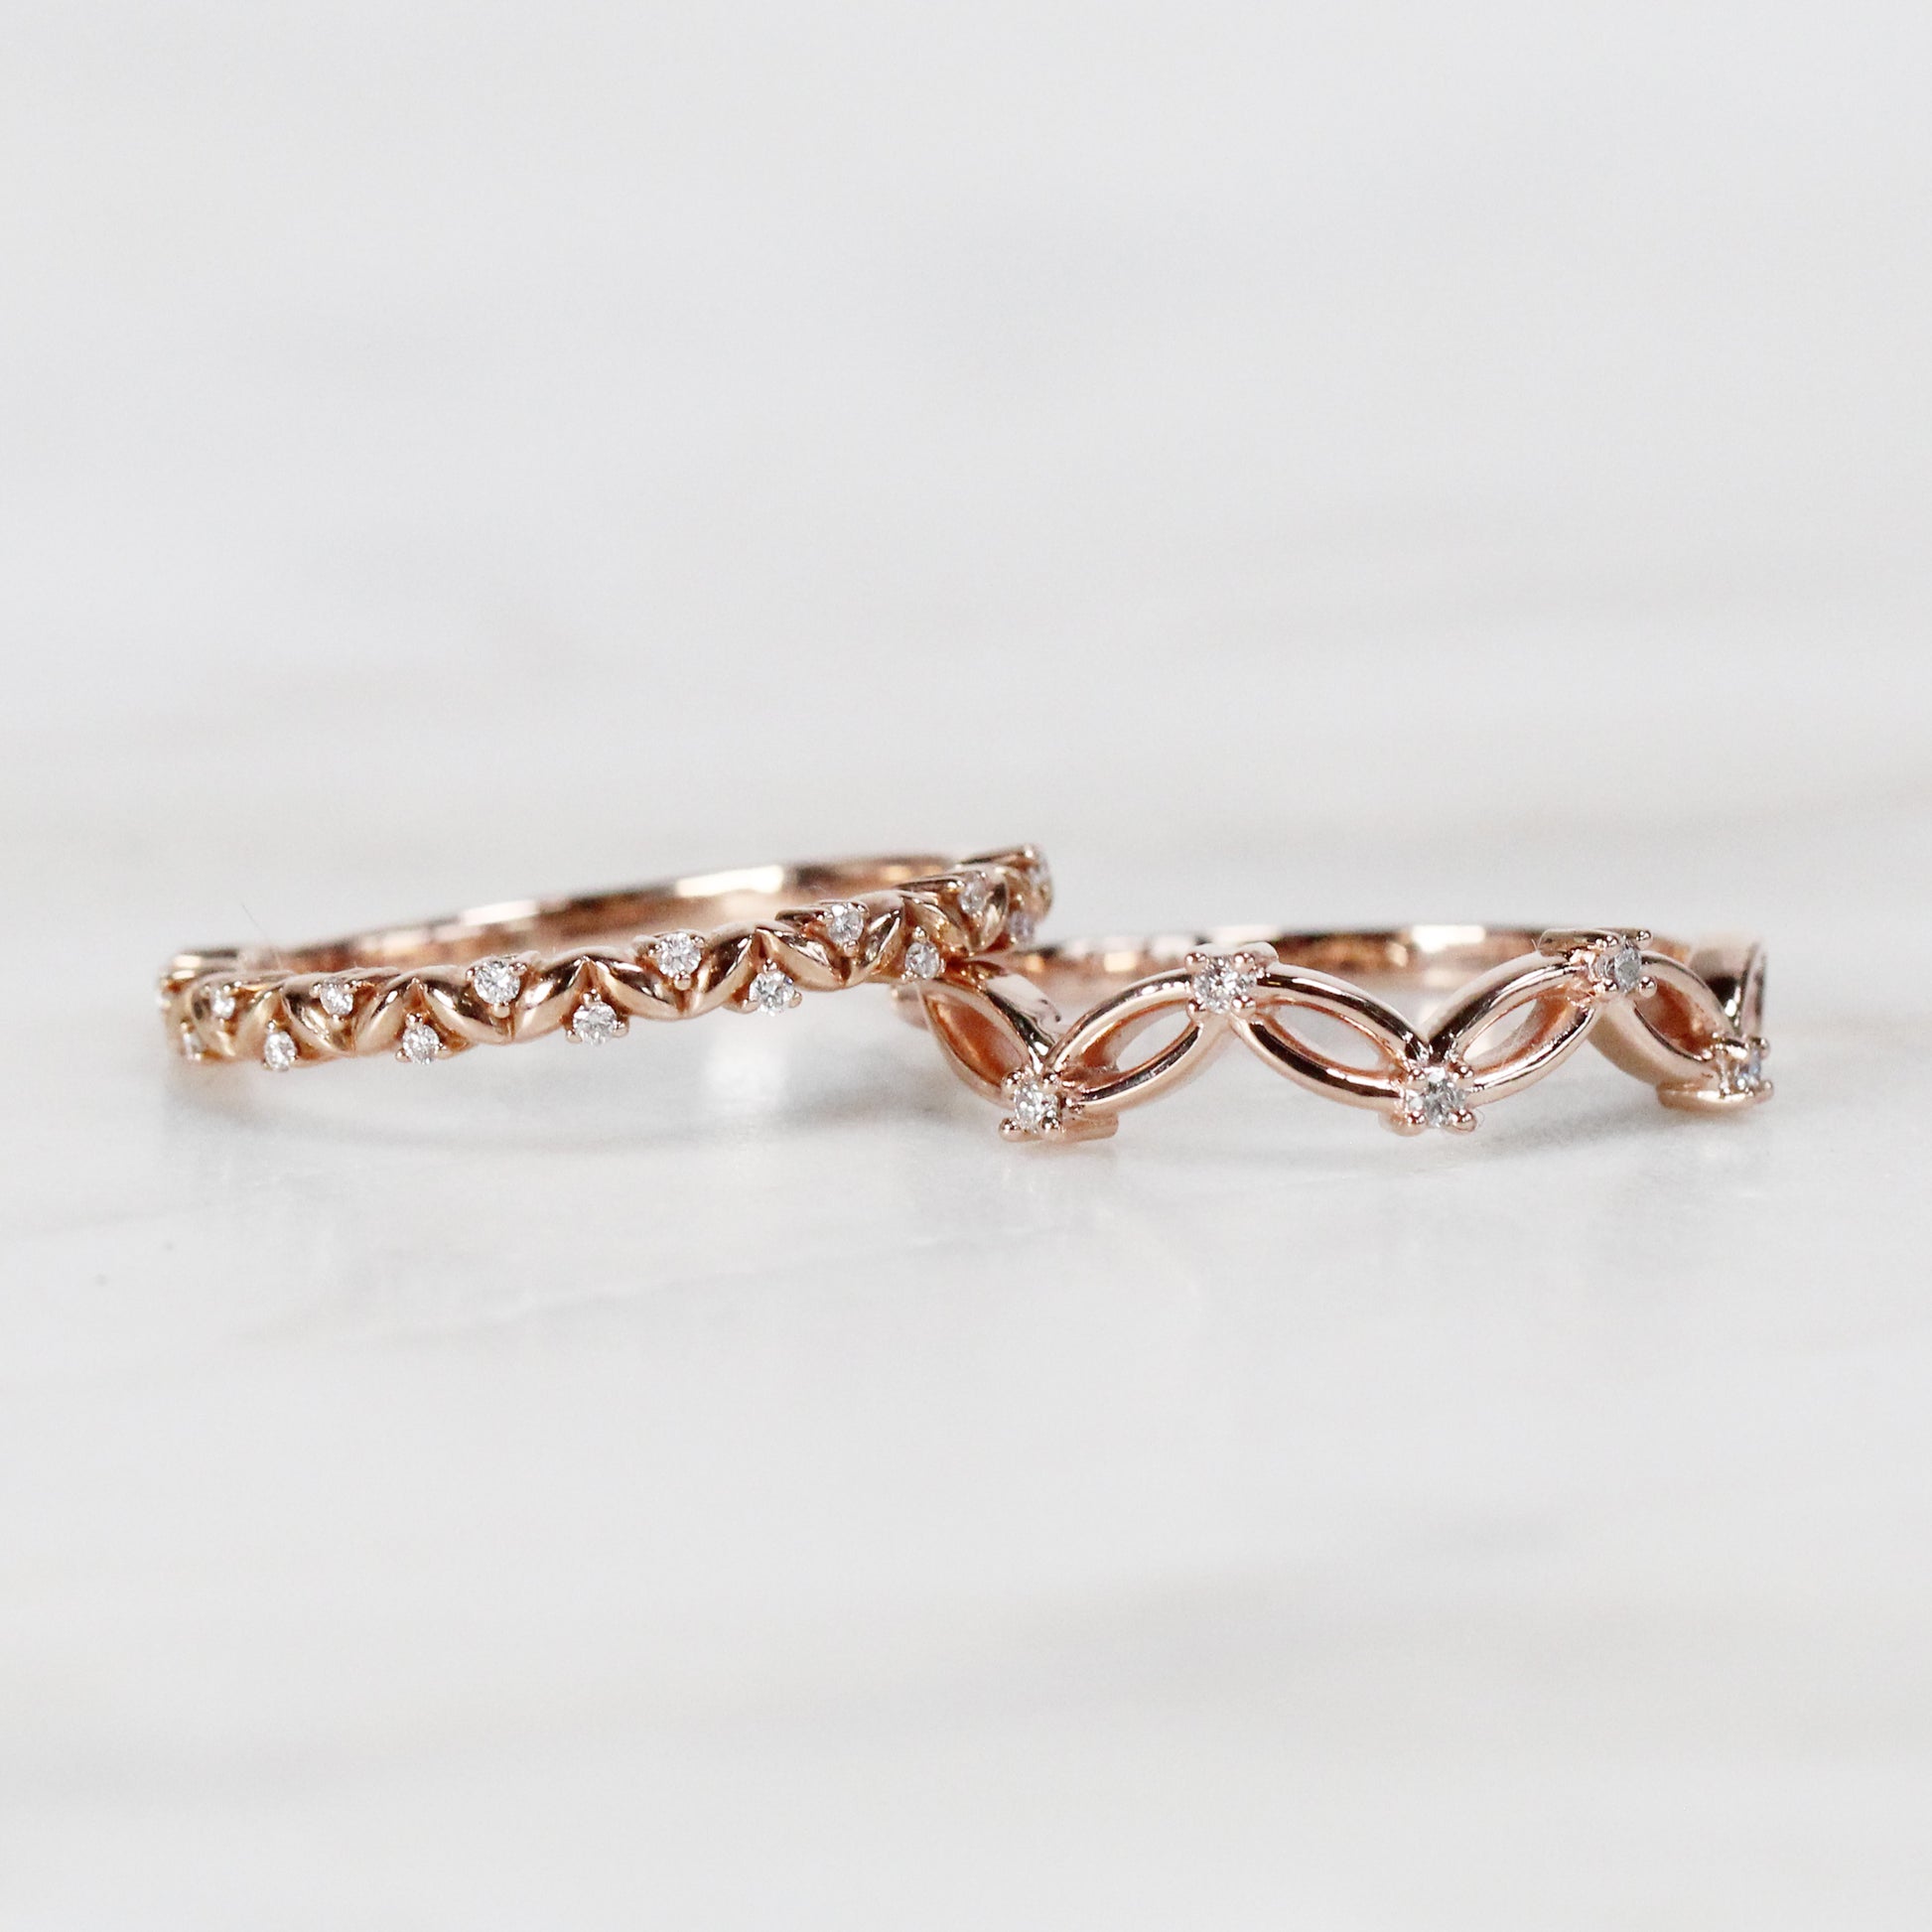 Josie Floral Leaf Diamond Wedding Stacking Band - Midwinter Co. Alternative Bridal Rings and Modern Fine Jewelry